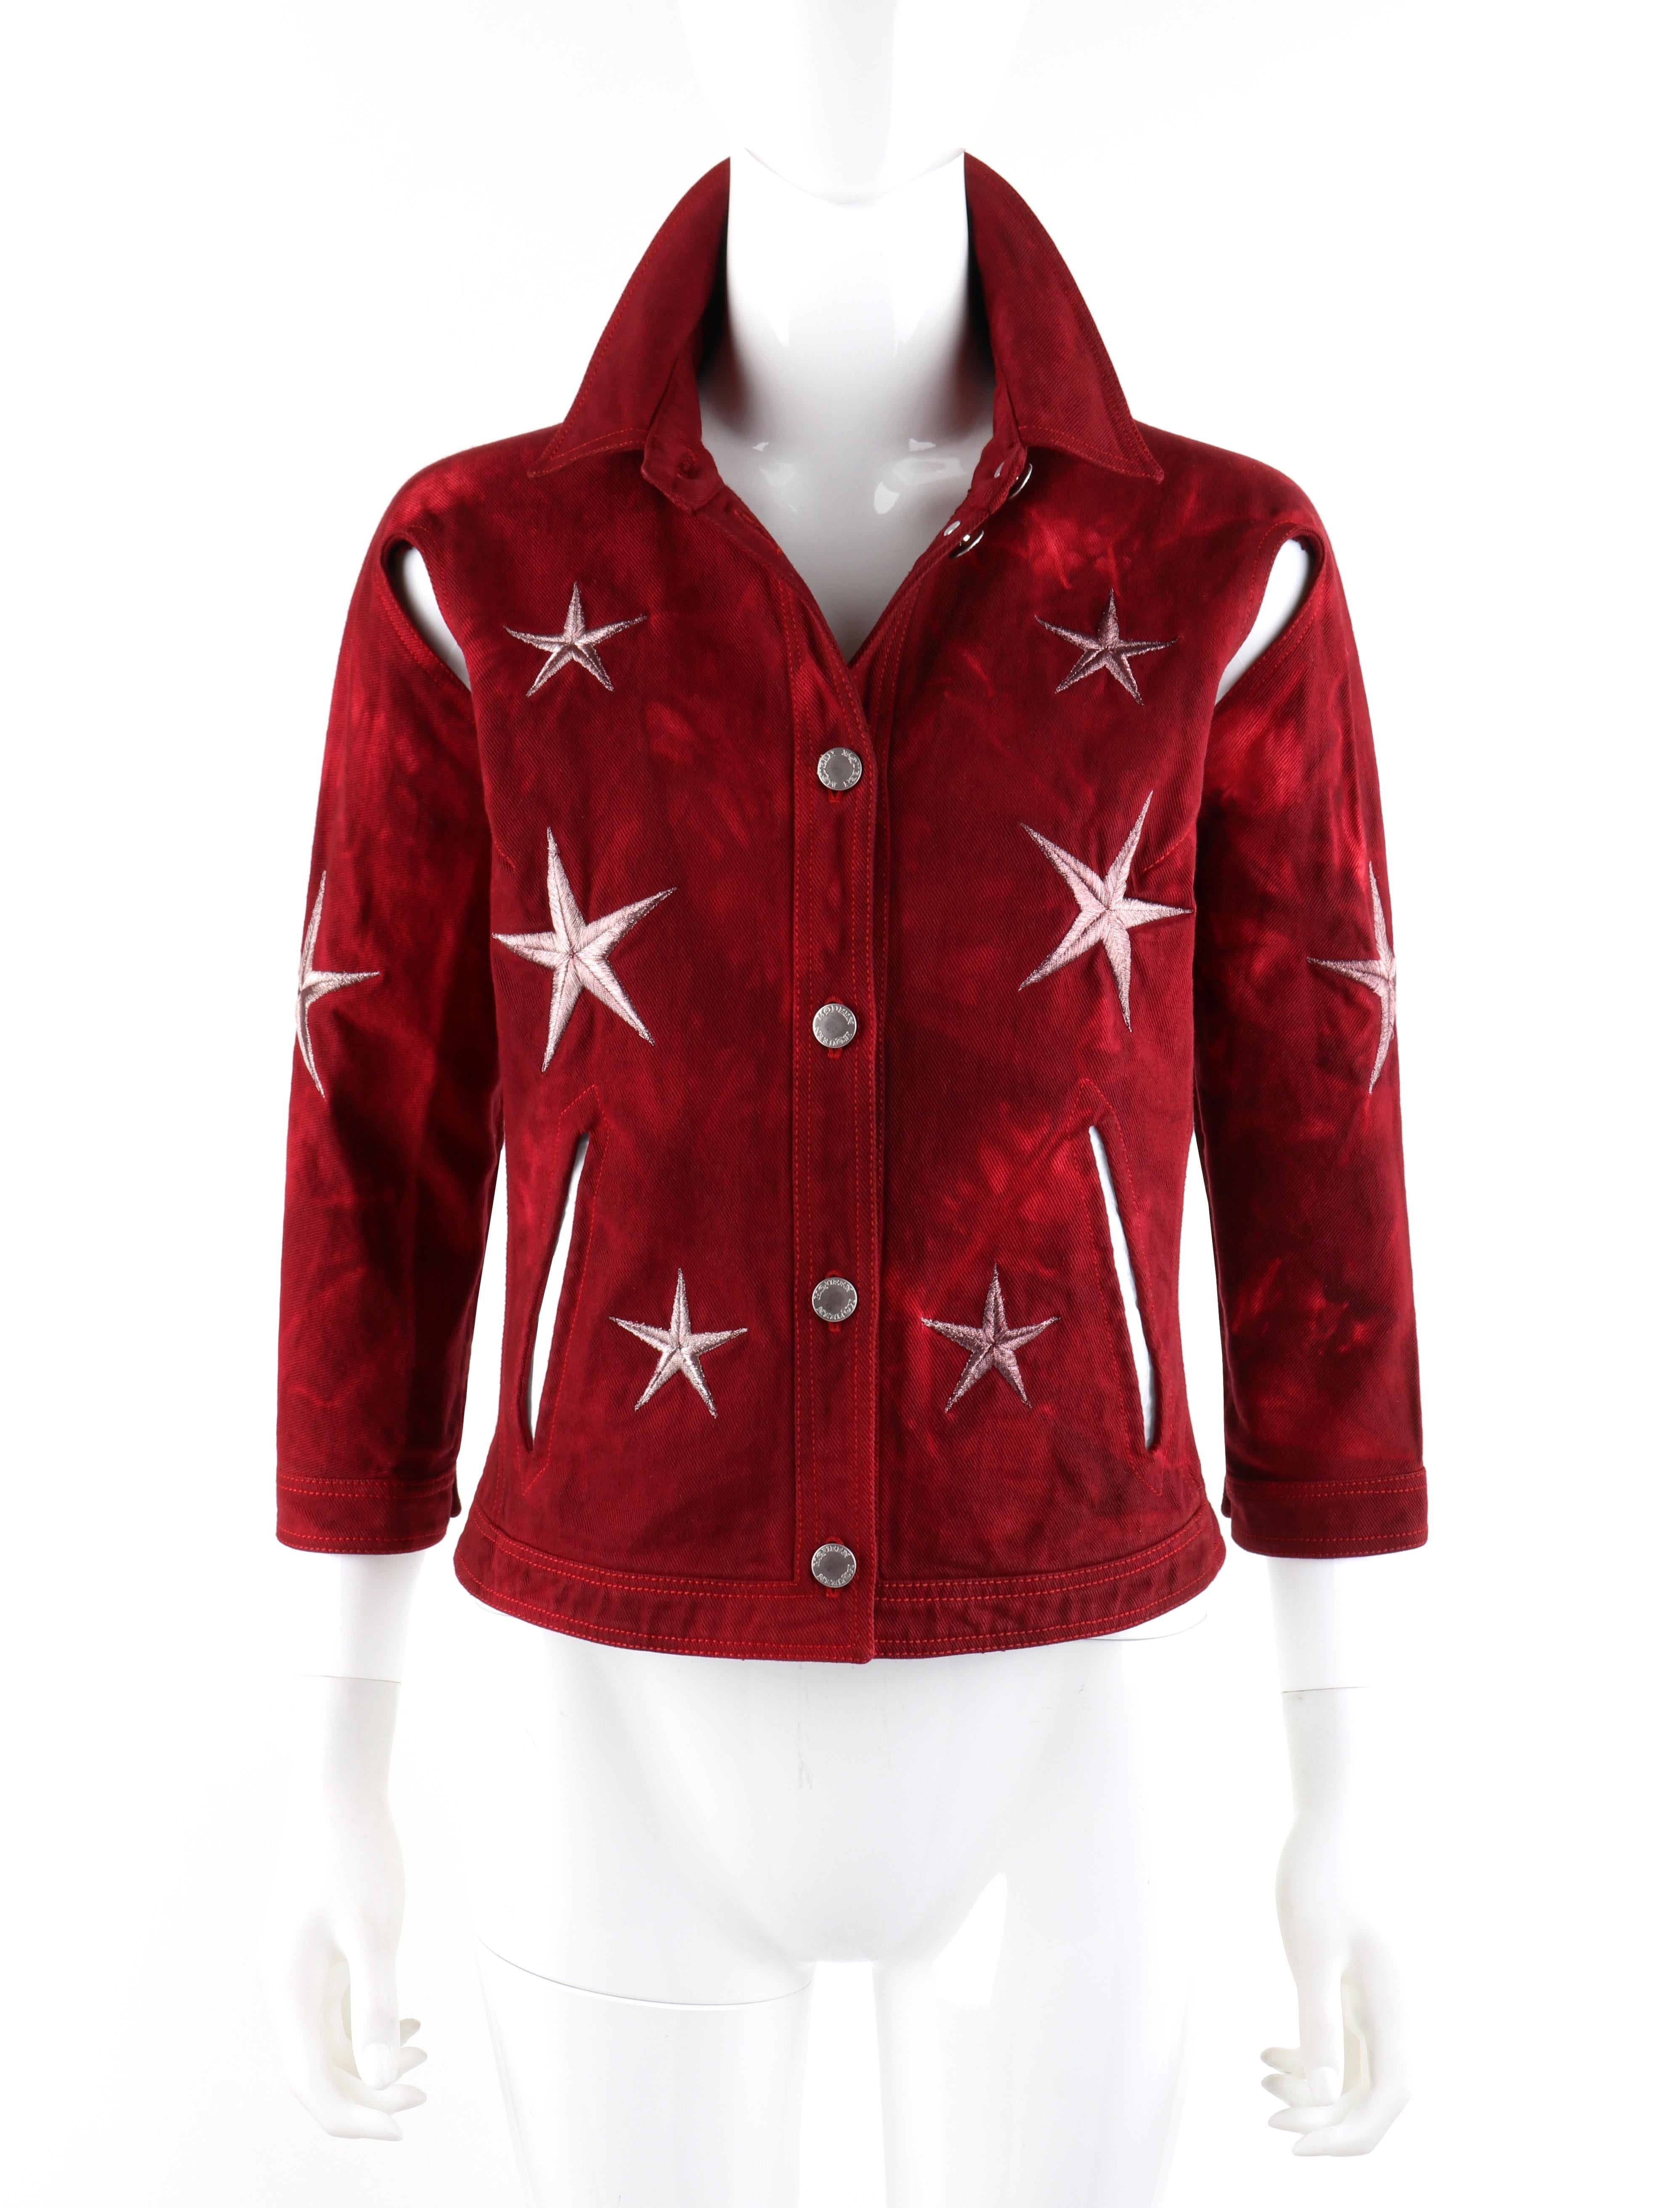 ALEXANDER McQUEEN S/S 2000 “Eye” Star Embroidered Aesthetic Denim Cutout Jacket

Brand / Manufacturer: Alexander McQueen
Collection: S/S 2000 “Eye”
Designer: Alexander McQueen
Style: Cutout ¾ sleeve denim jacket
Color(s): Shades of burgundy, red,